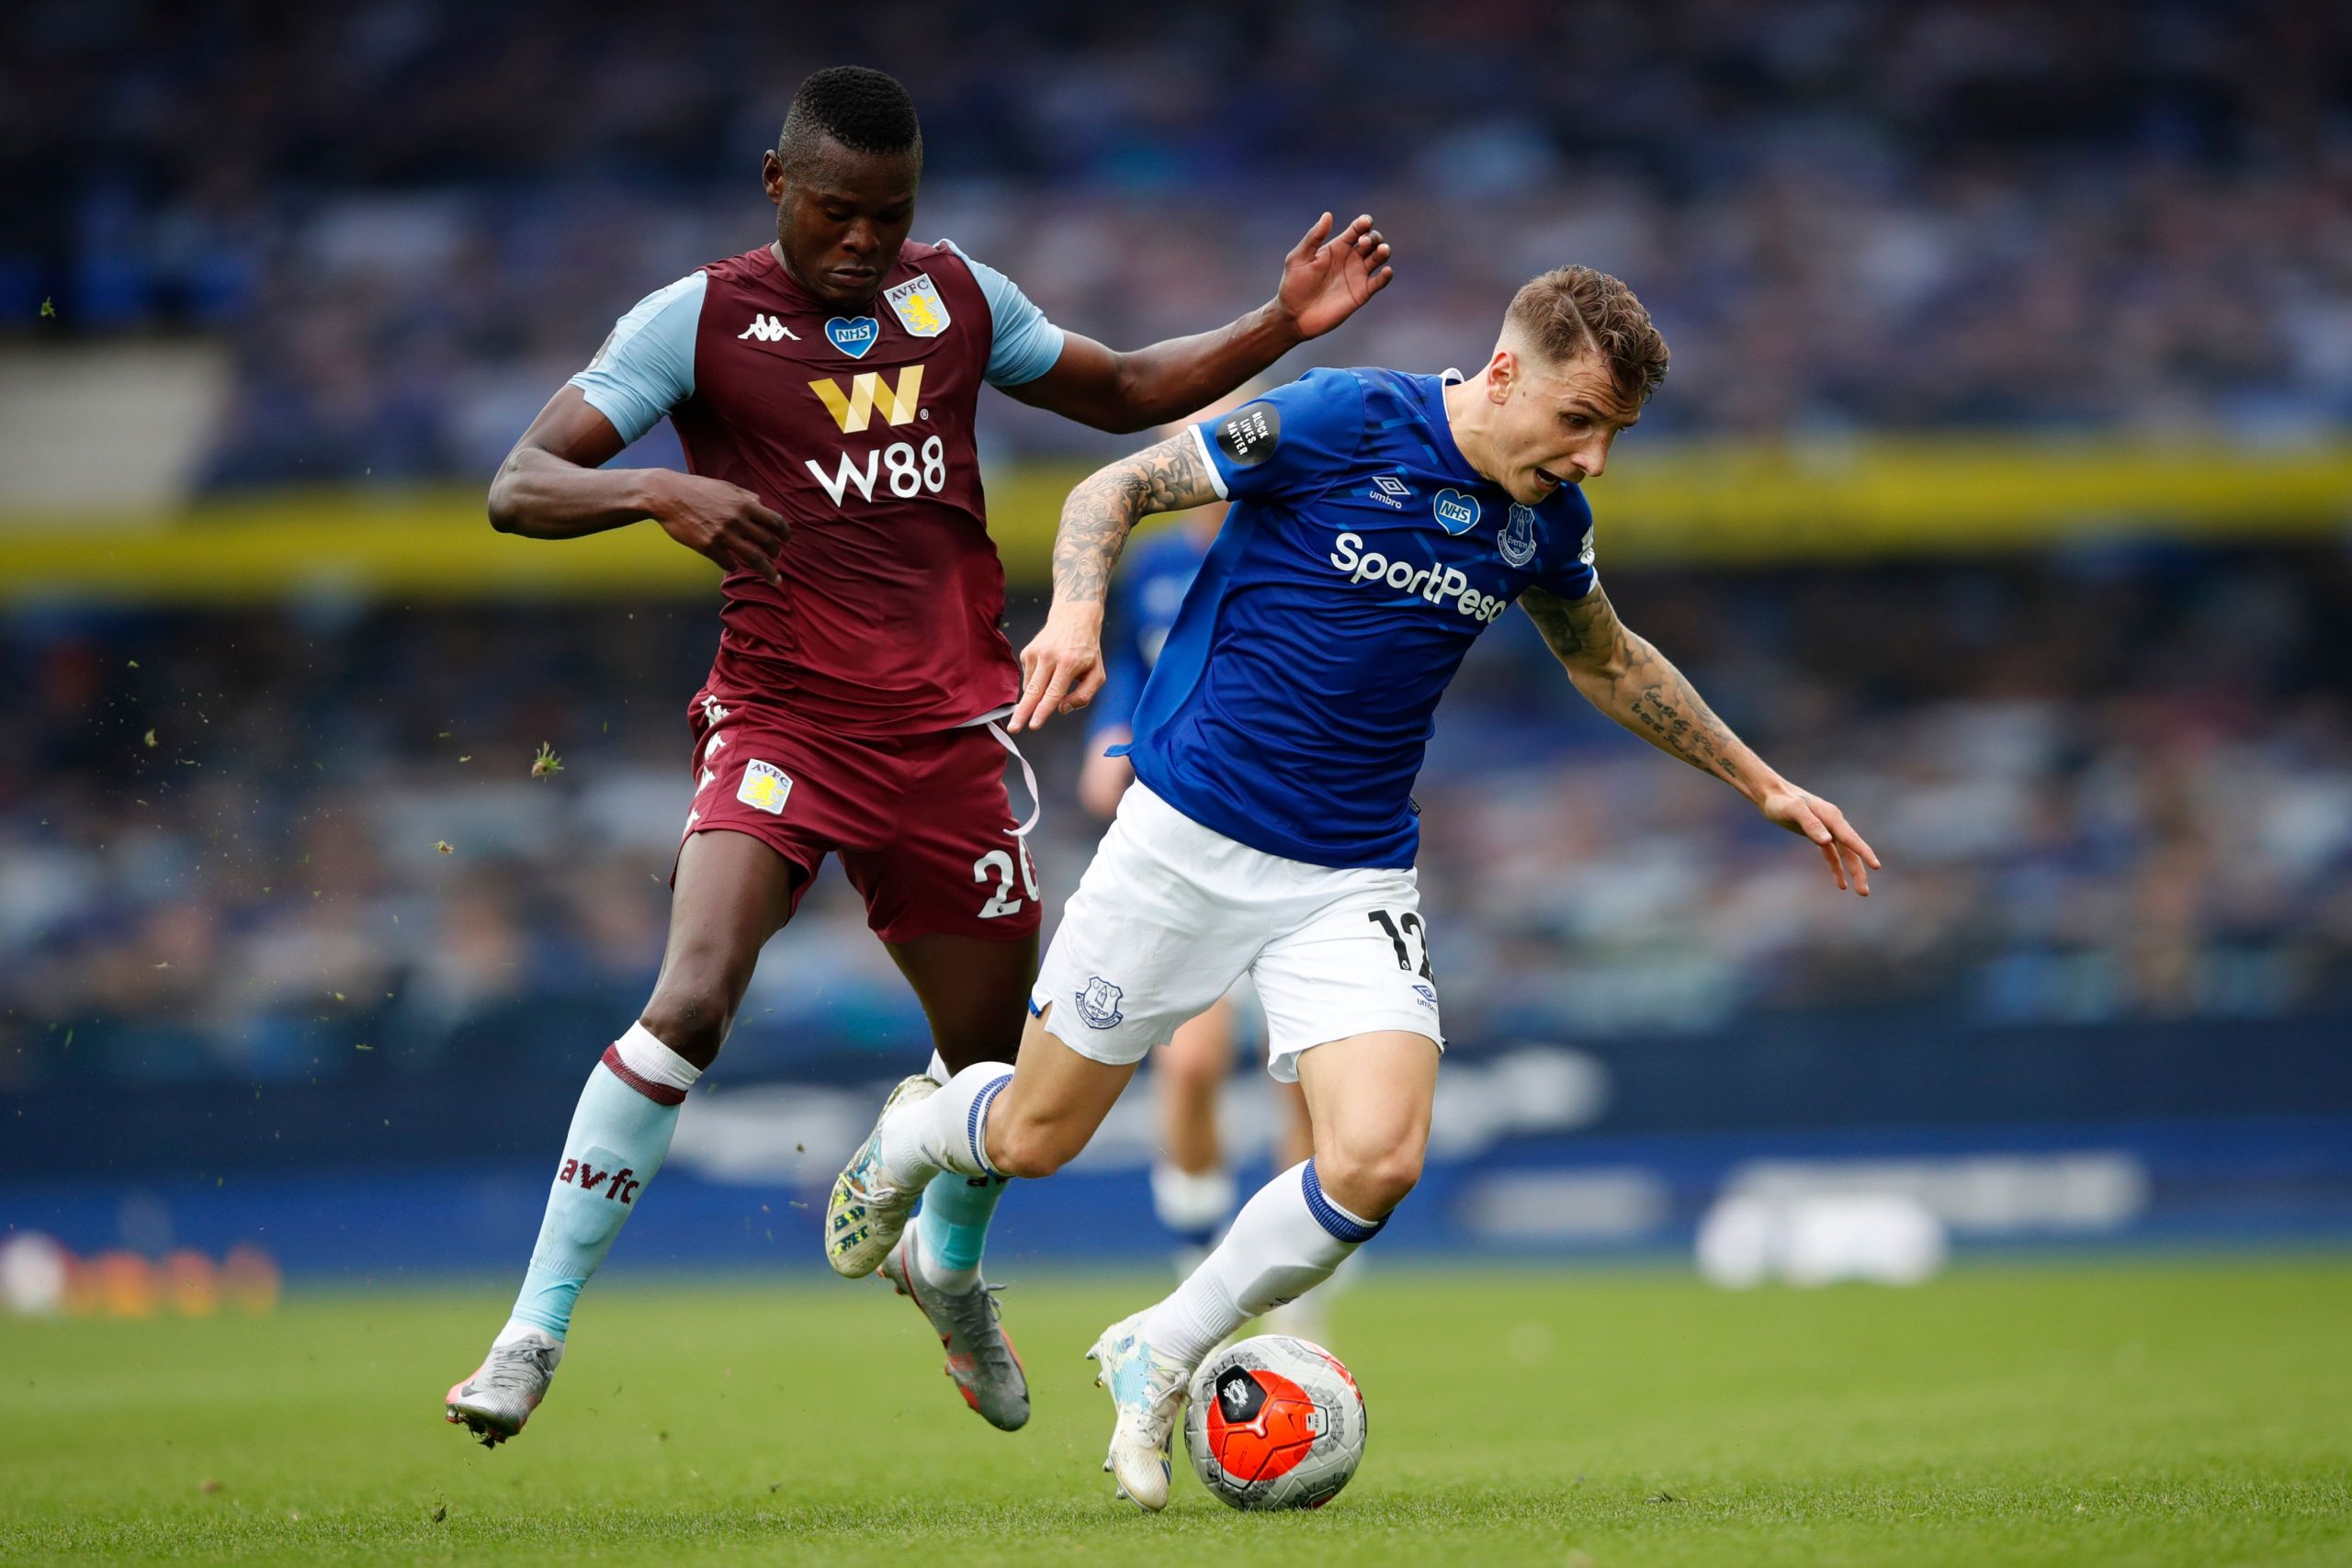 Everton full-back Lucas Digne is on Manchester City's radar (Everton's Digne is seen in the photo)